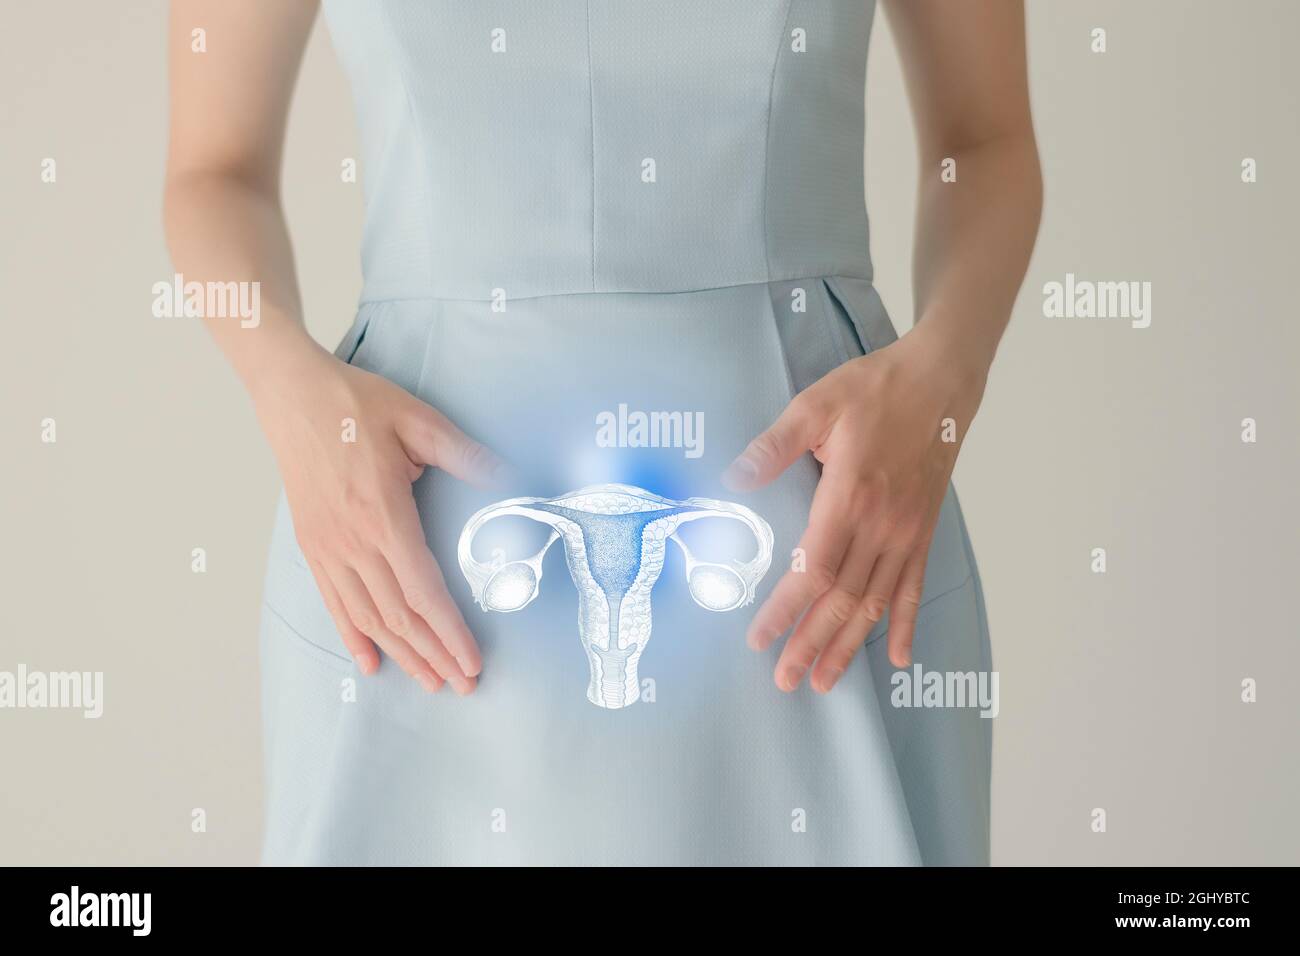 Unrecognizable female patient in blue clothes, highlighted handrawn uterus in hands. Human reproductive system issues concept. Stock Photo